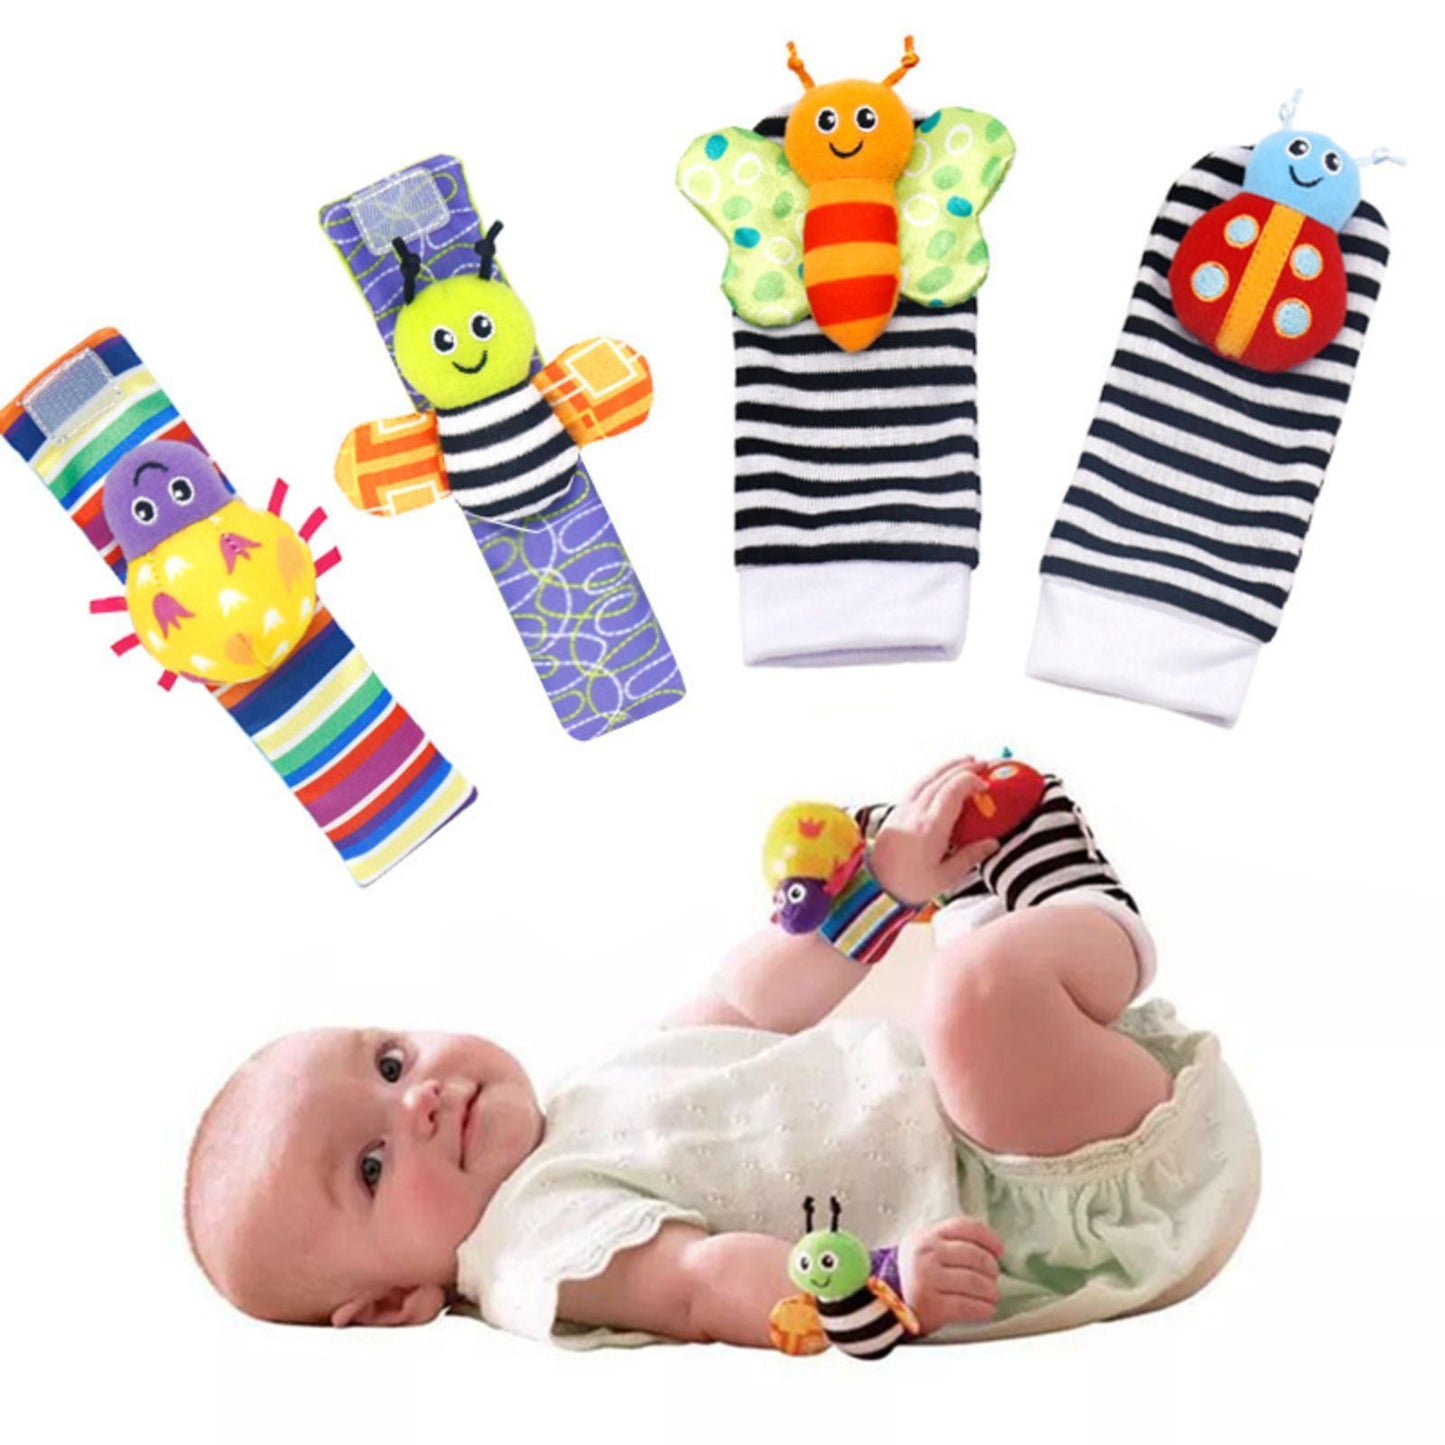 1 Pack Baby Watch Band With Socks, Ringing Bell Dolls Socks, 3-12months Girls And Boys Learning Toys